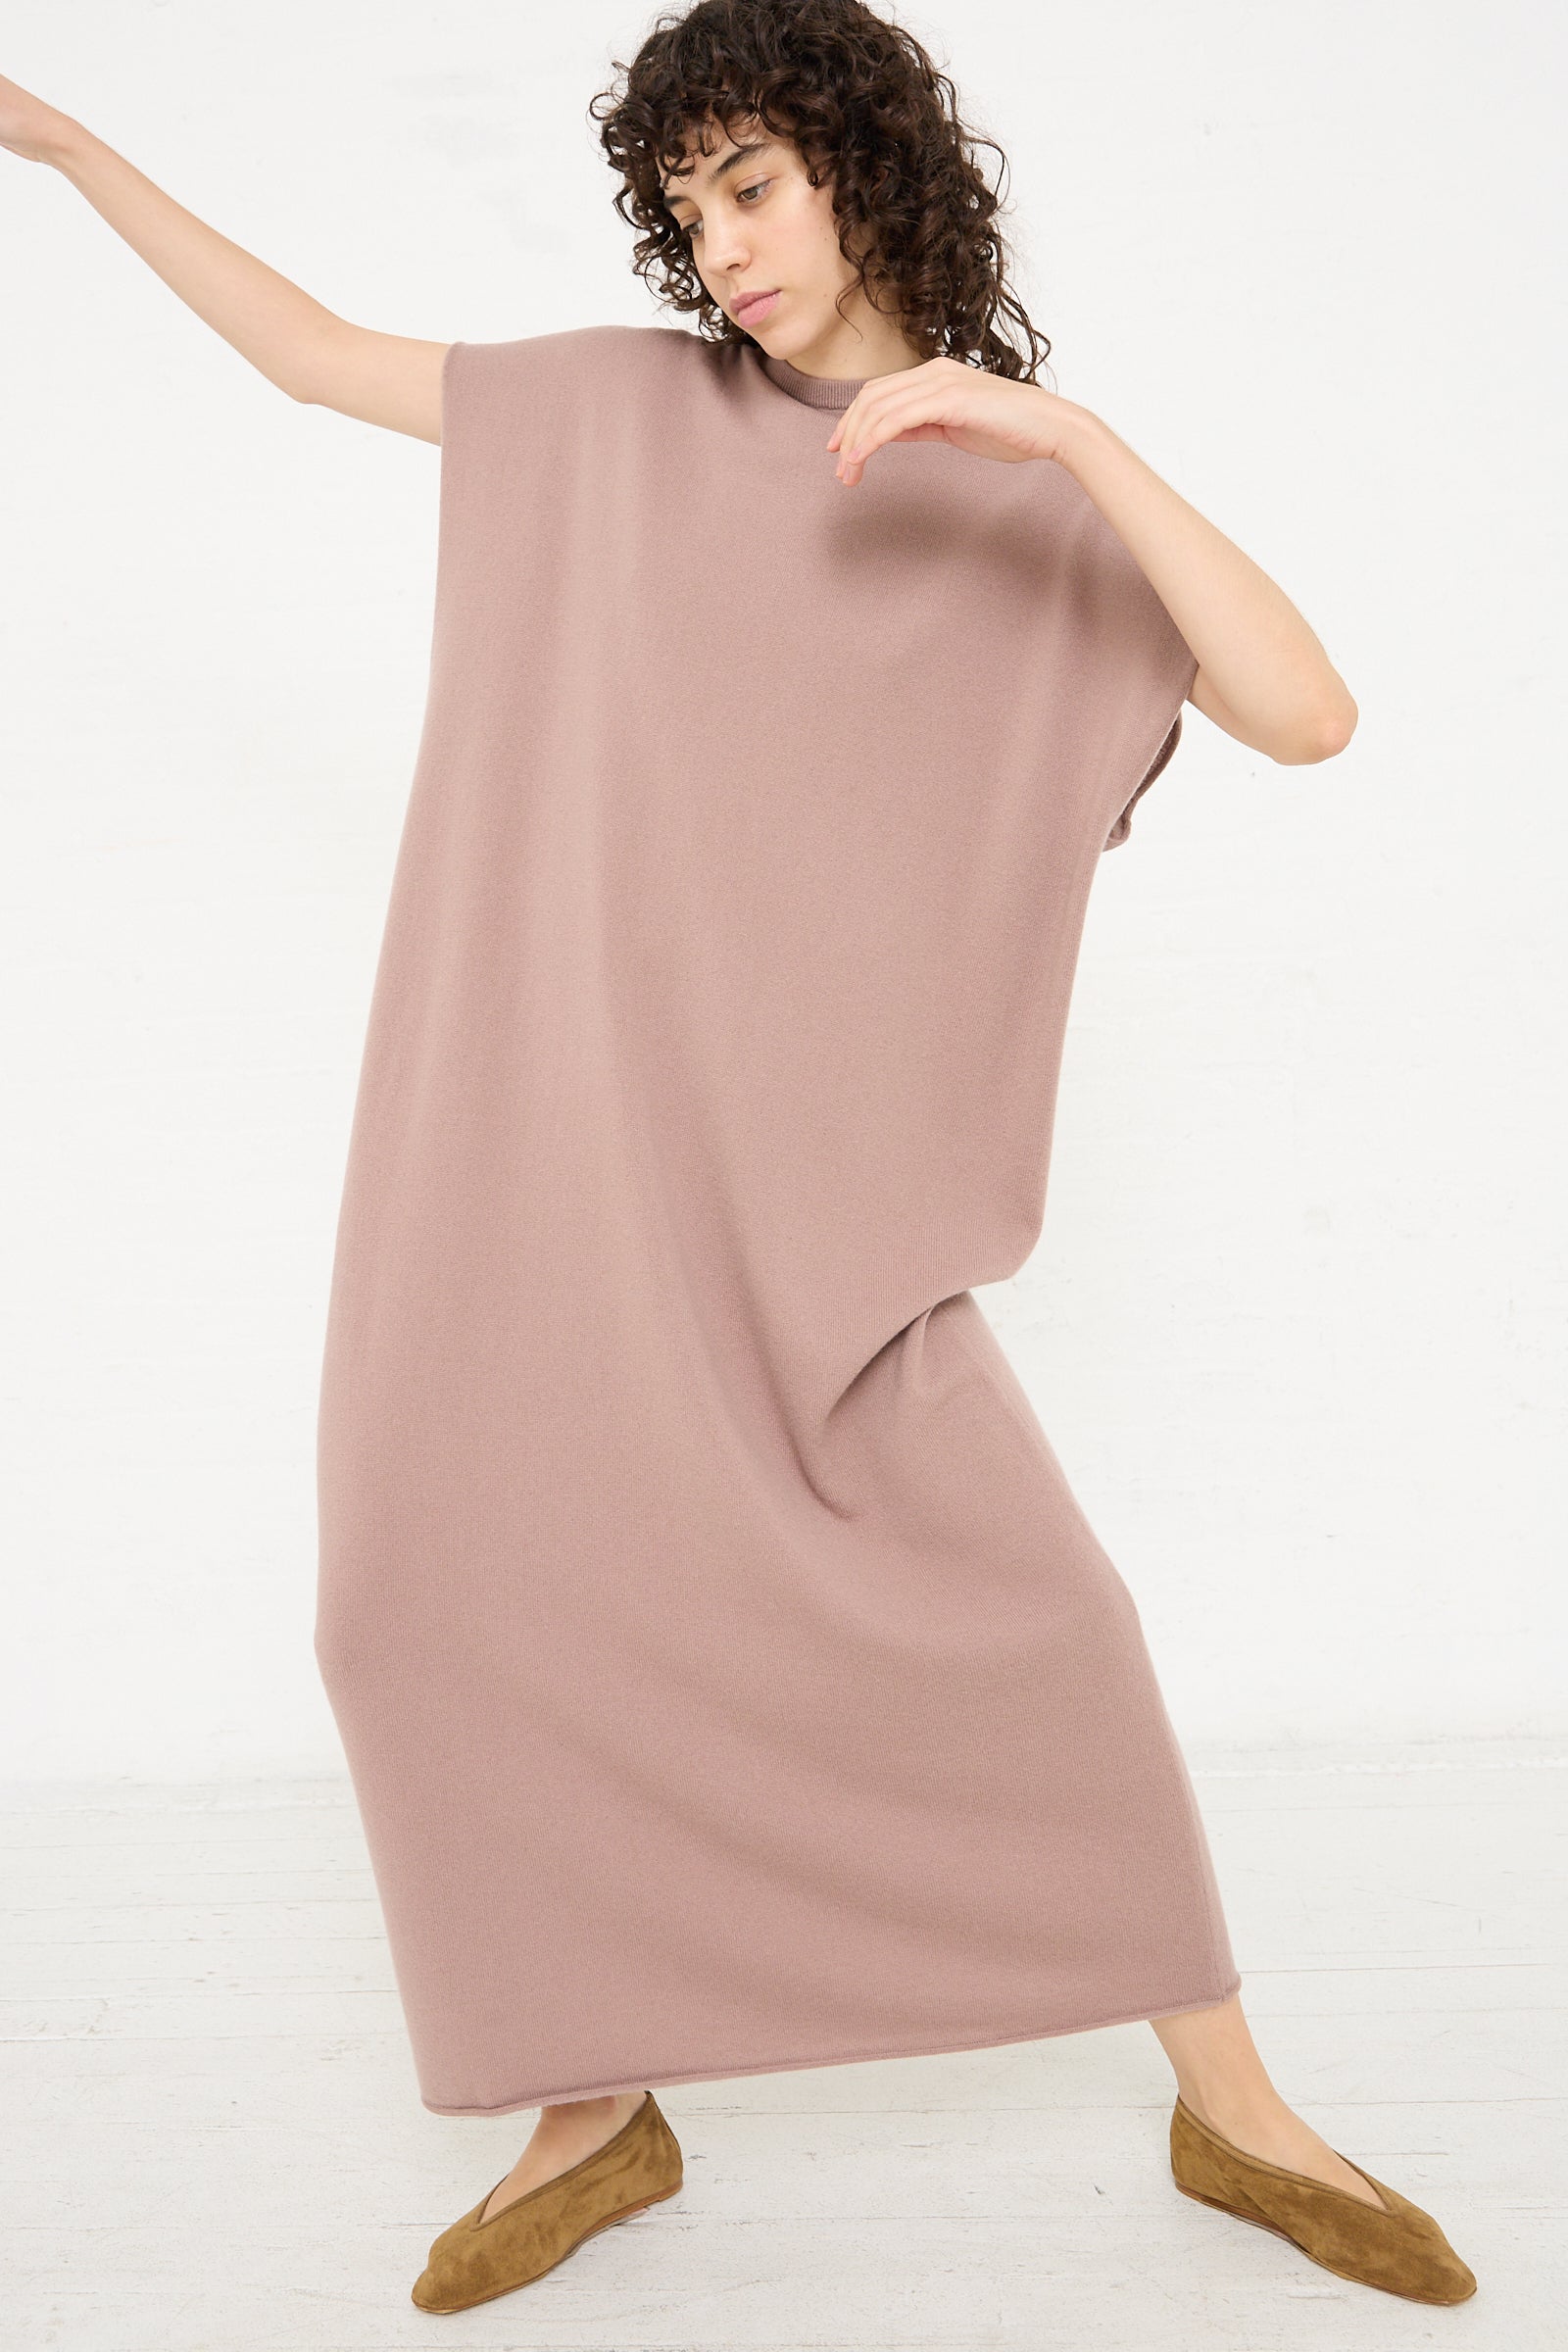 The model is wearing an Extreme Cashmere No. 169 Healing Dress in Clay with long sleeves.